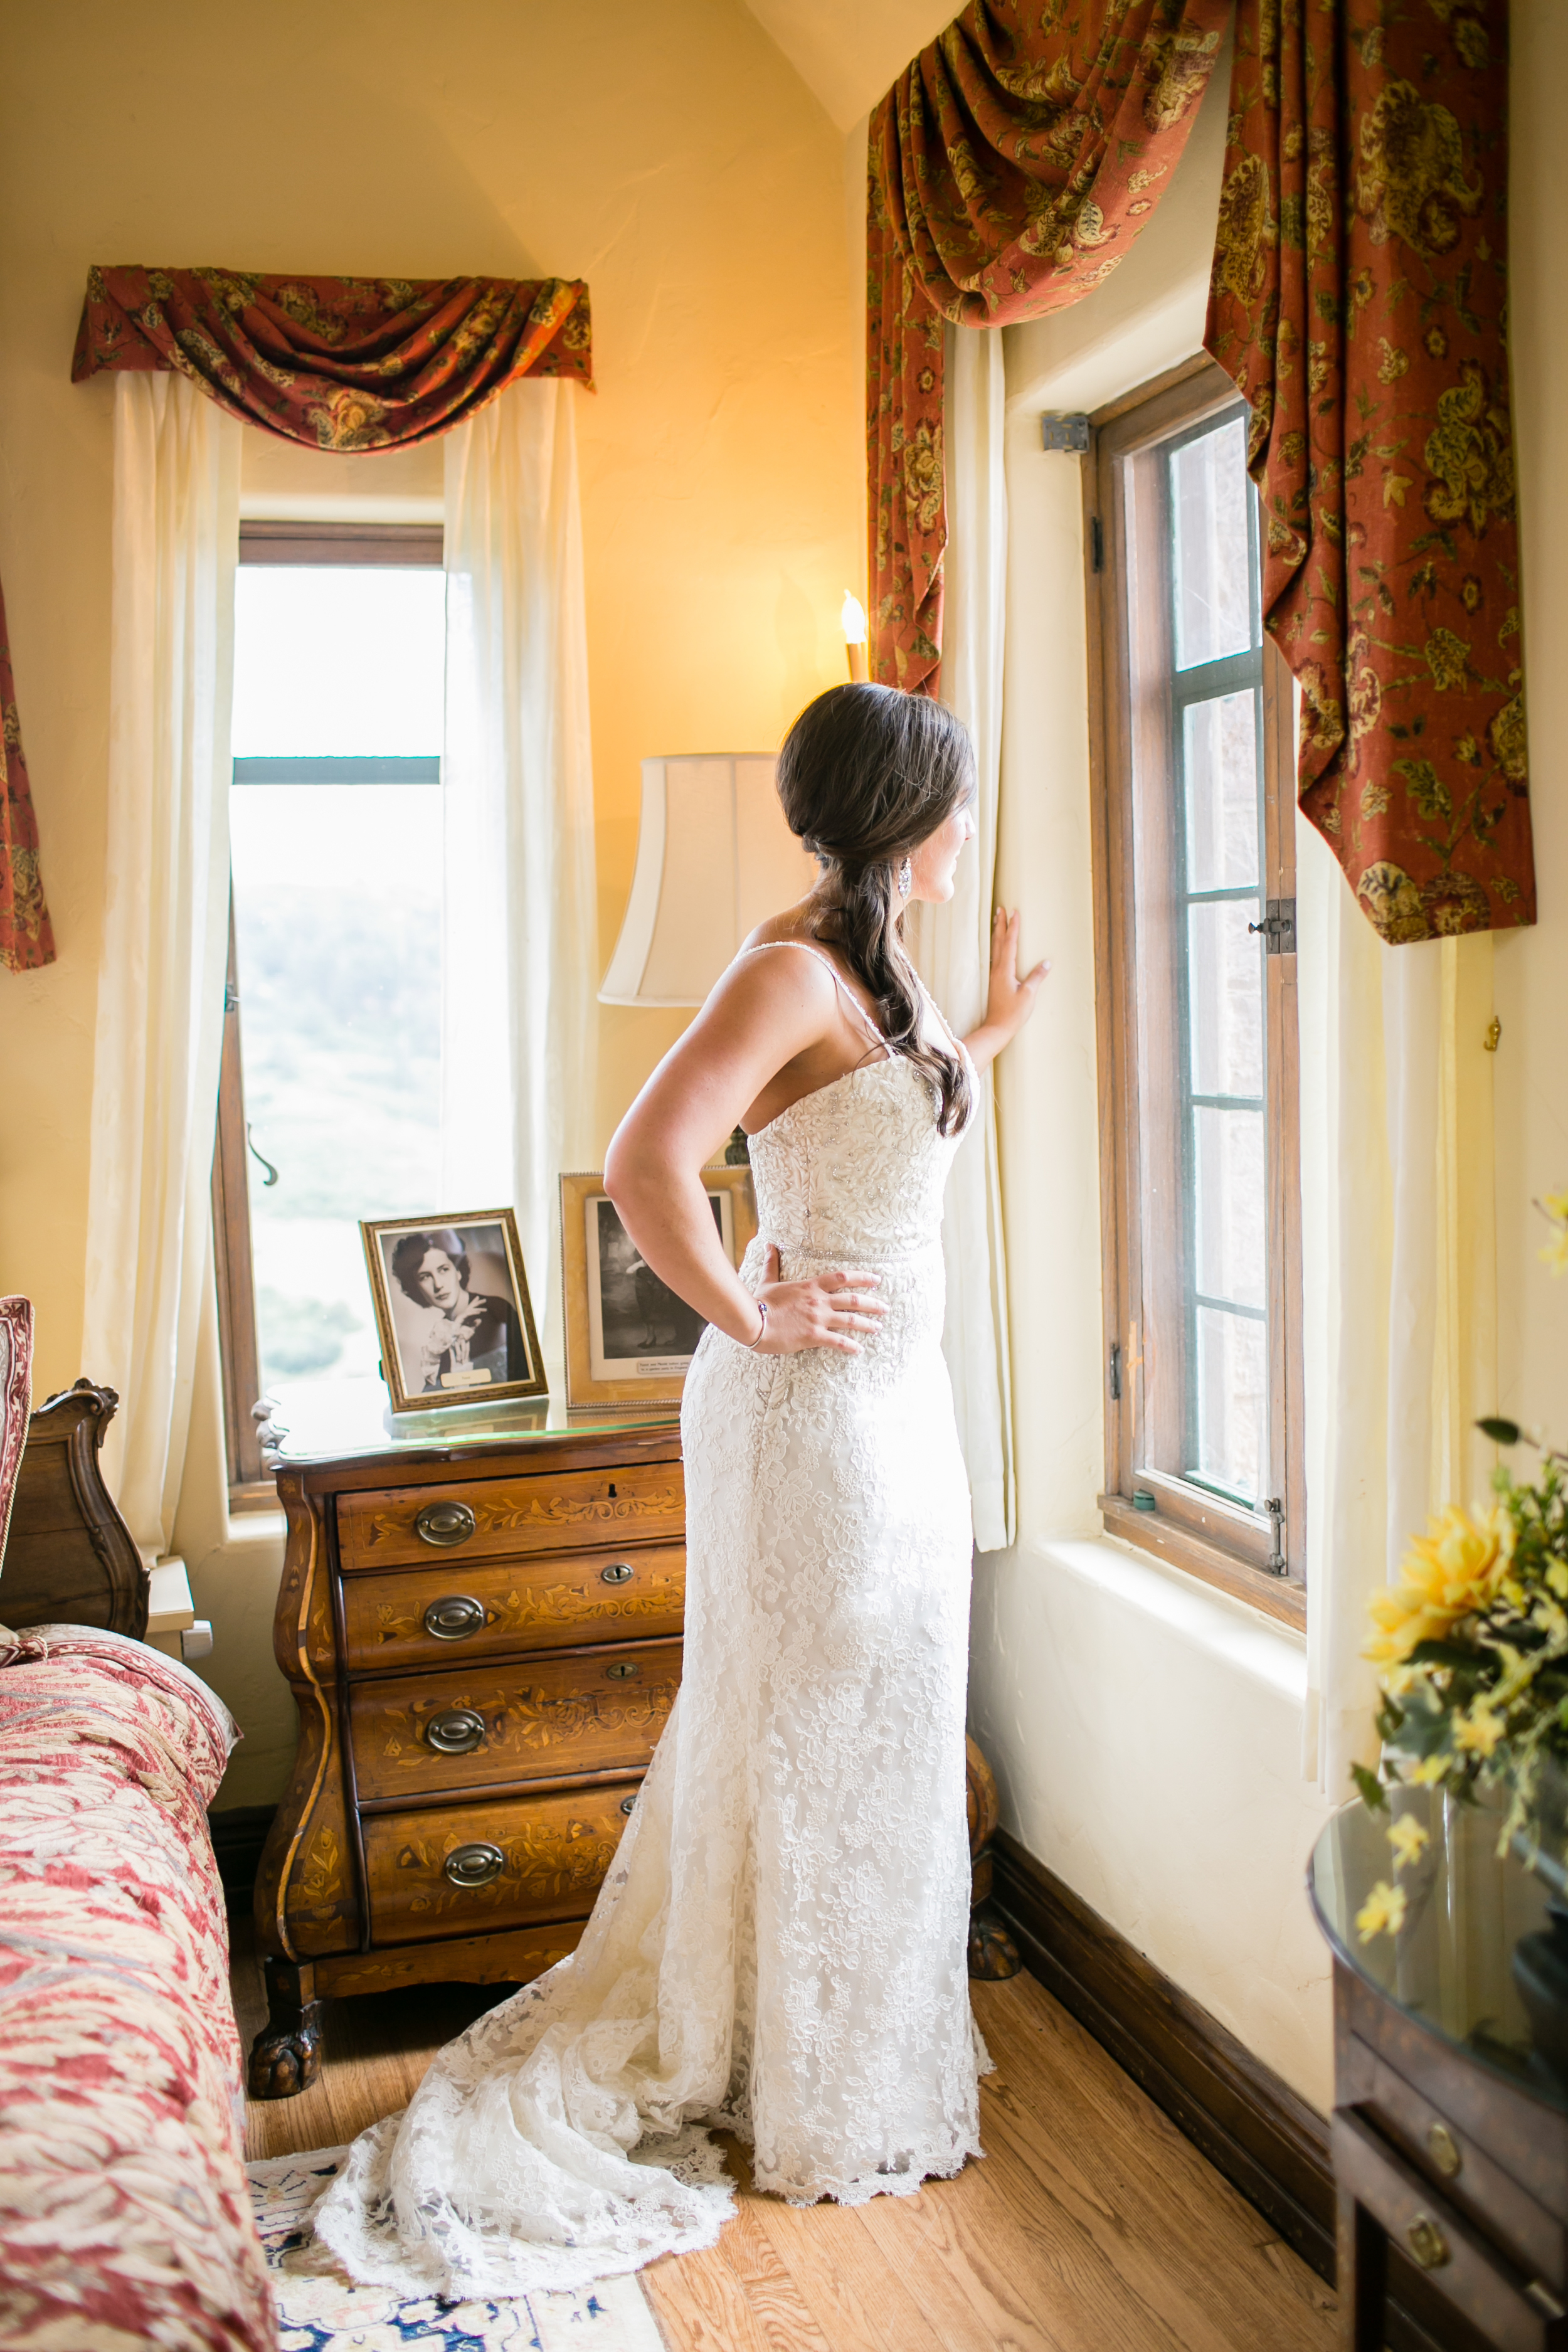  Colorado Wedding | Reem Acra gown from Little White Dress | Liz Cook Photography 